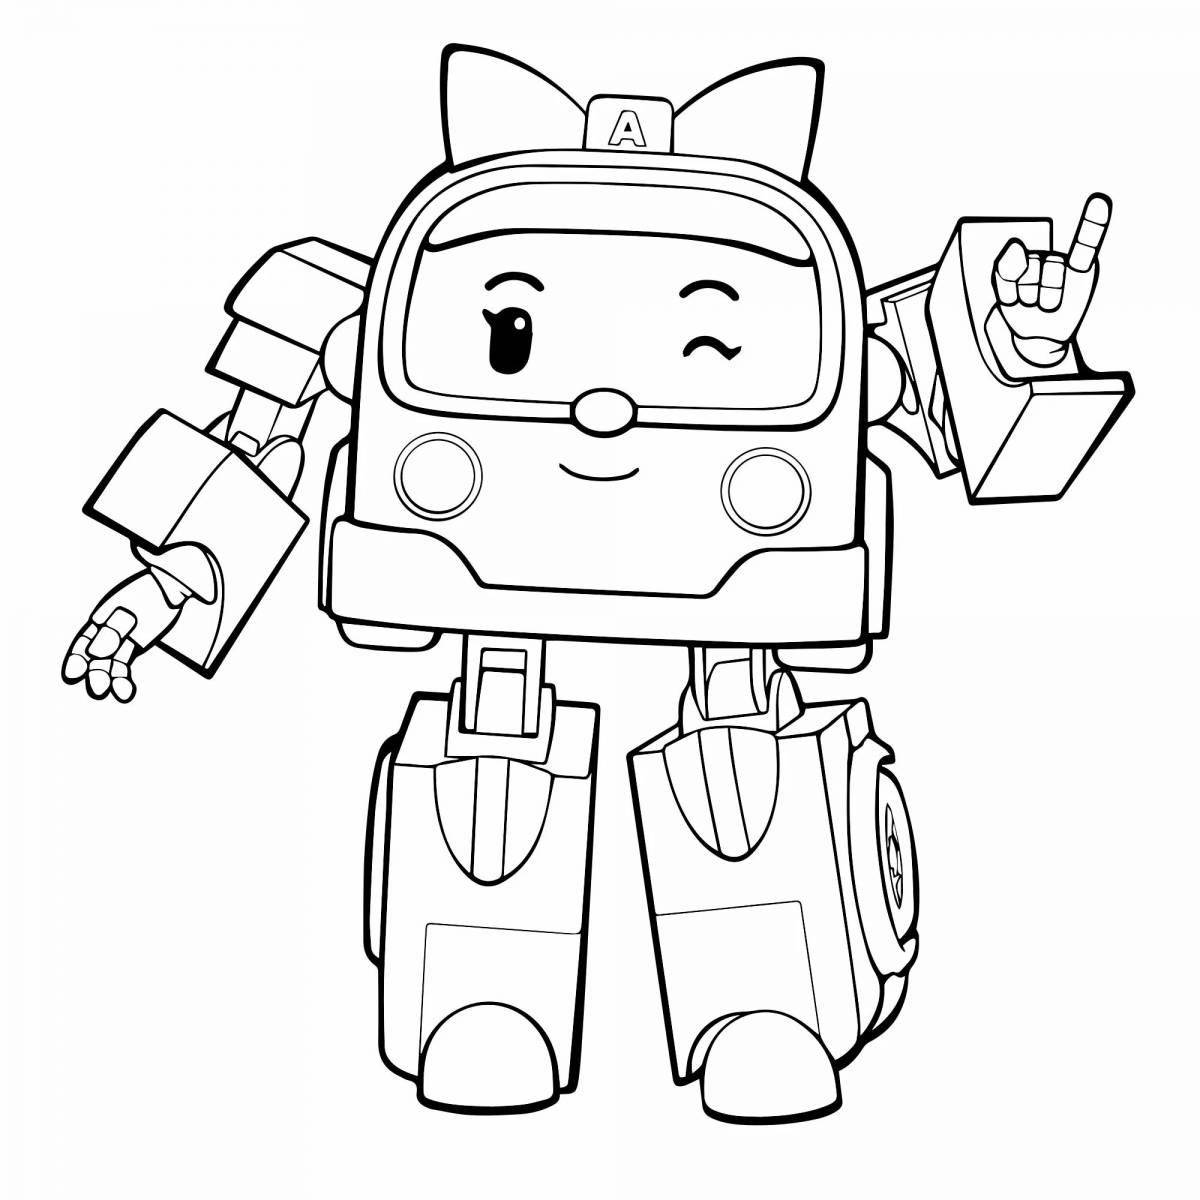 Fun coloring of police robots for kids